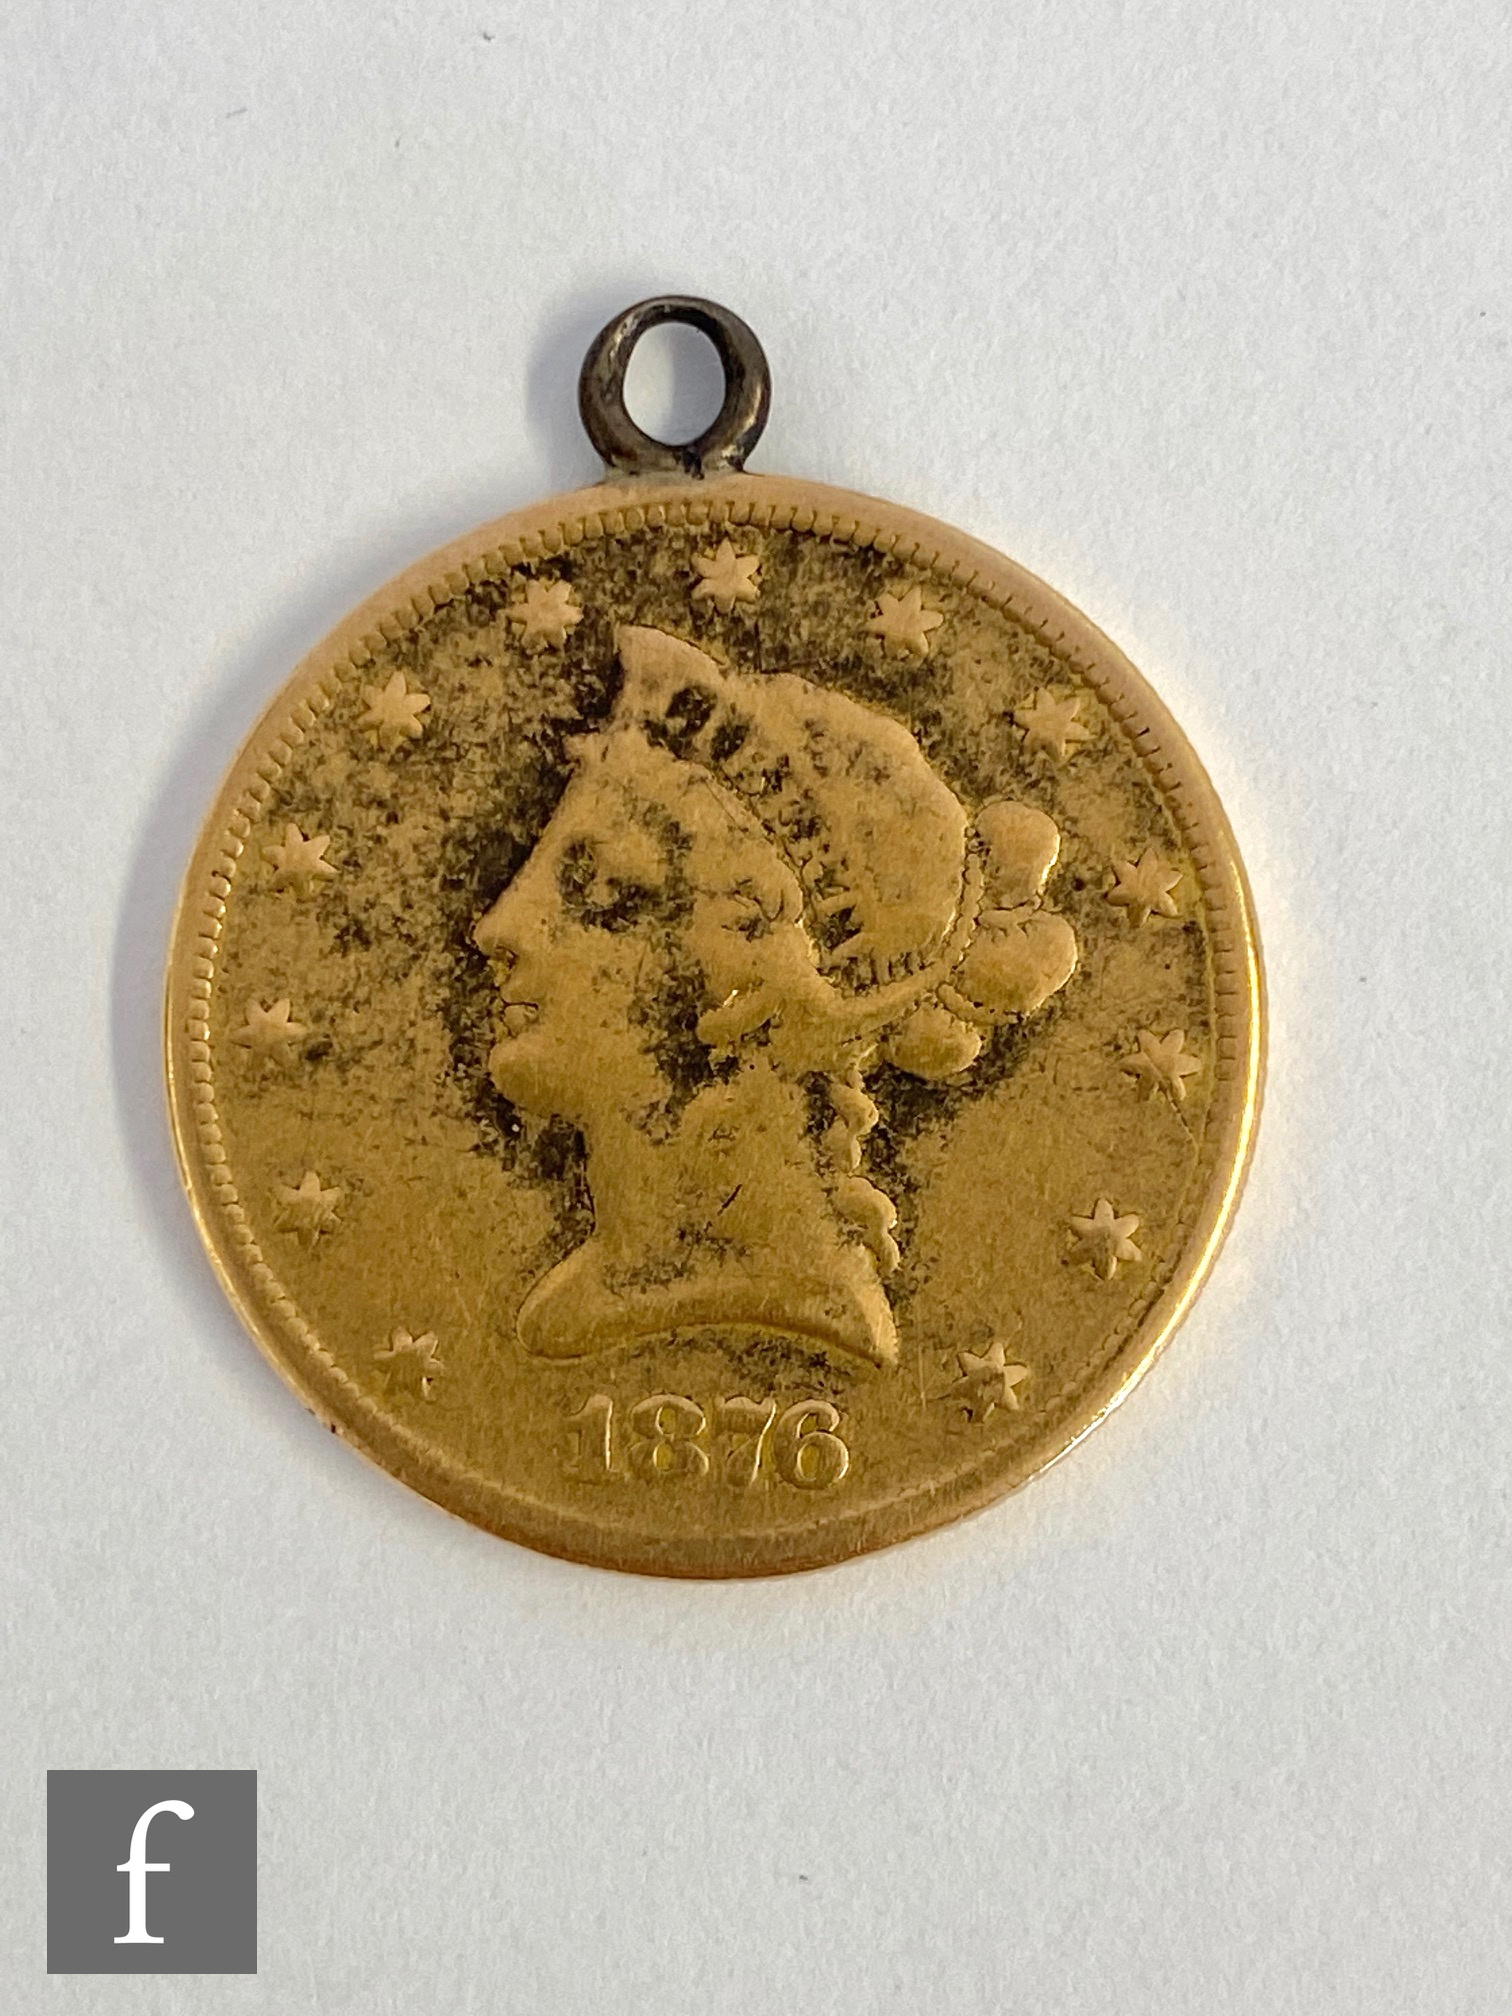 An American gold twenty dollar coin dated 1876 with solder jump ring, weight 16.3g, worn.